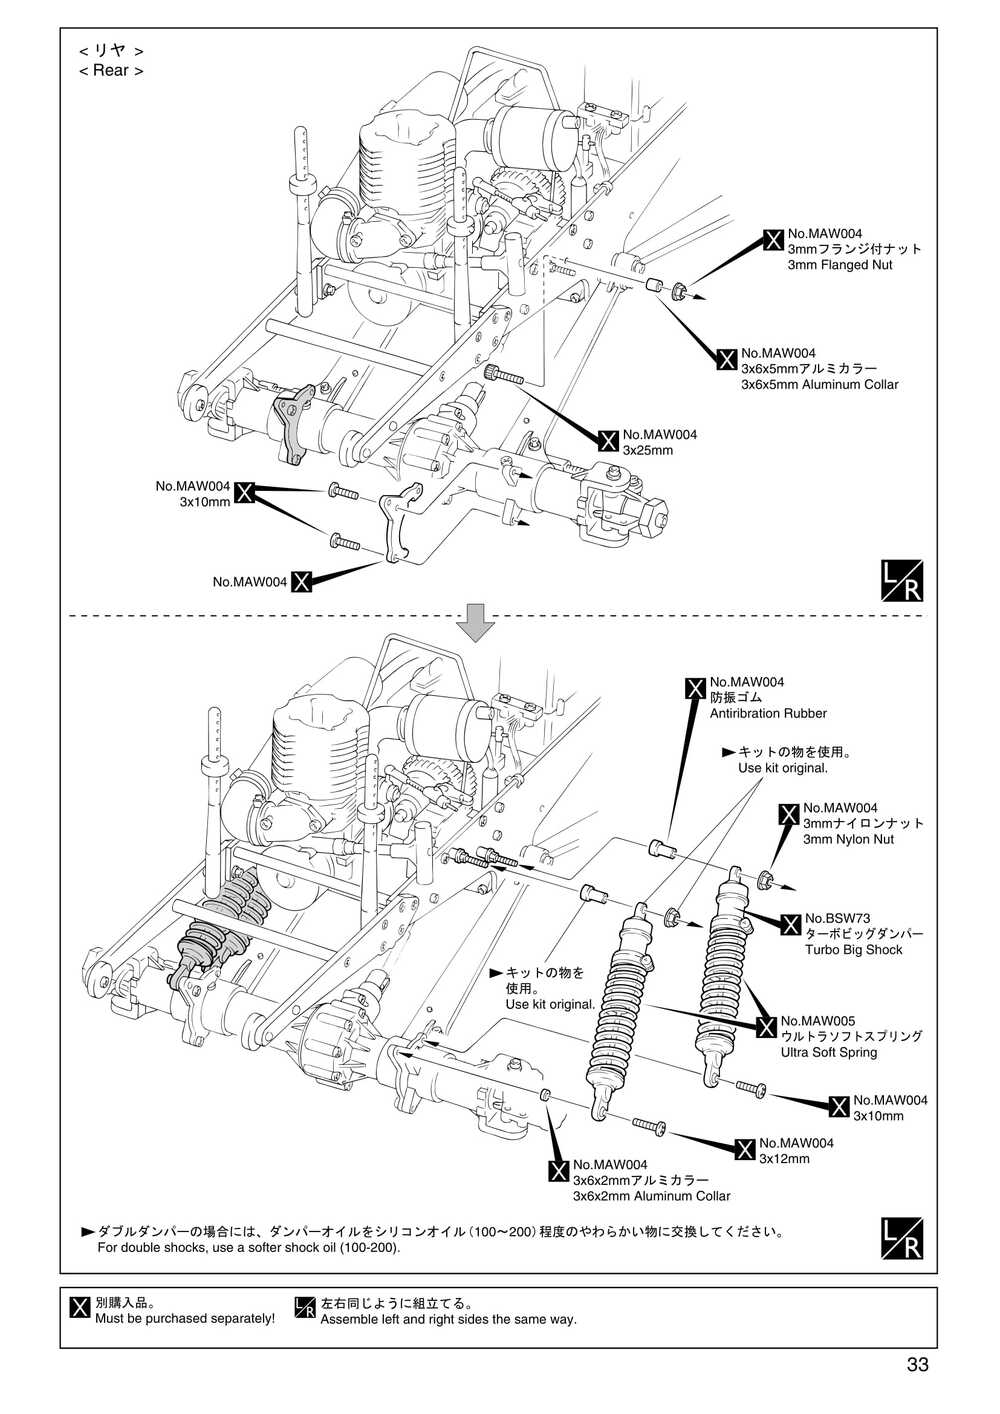 Kyosho - 31221 - Mad-Force - Manual - Page 33